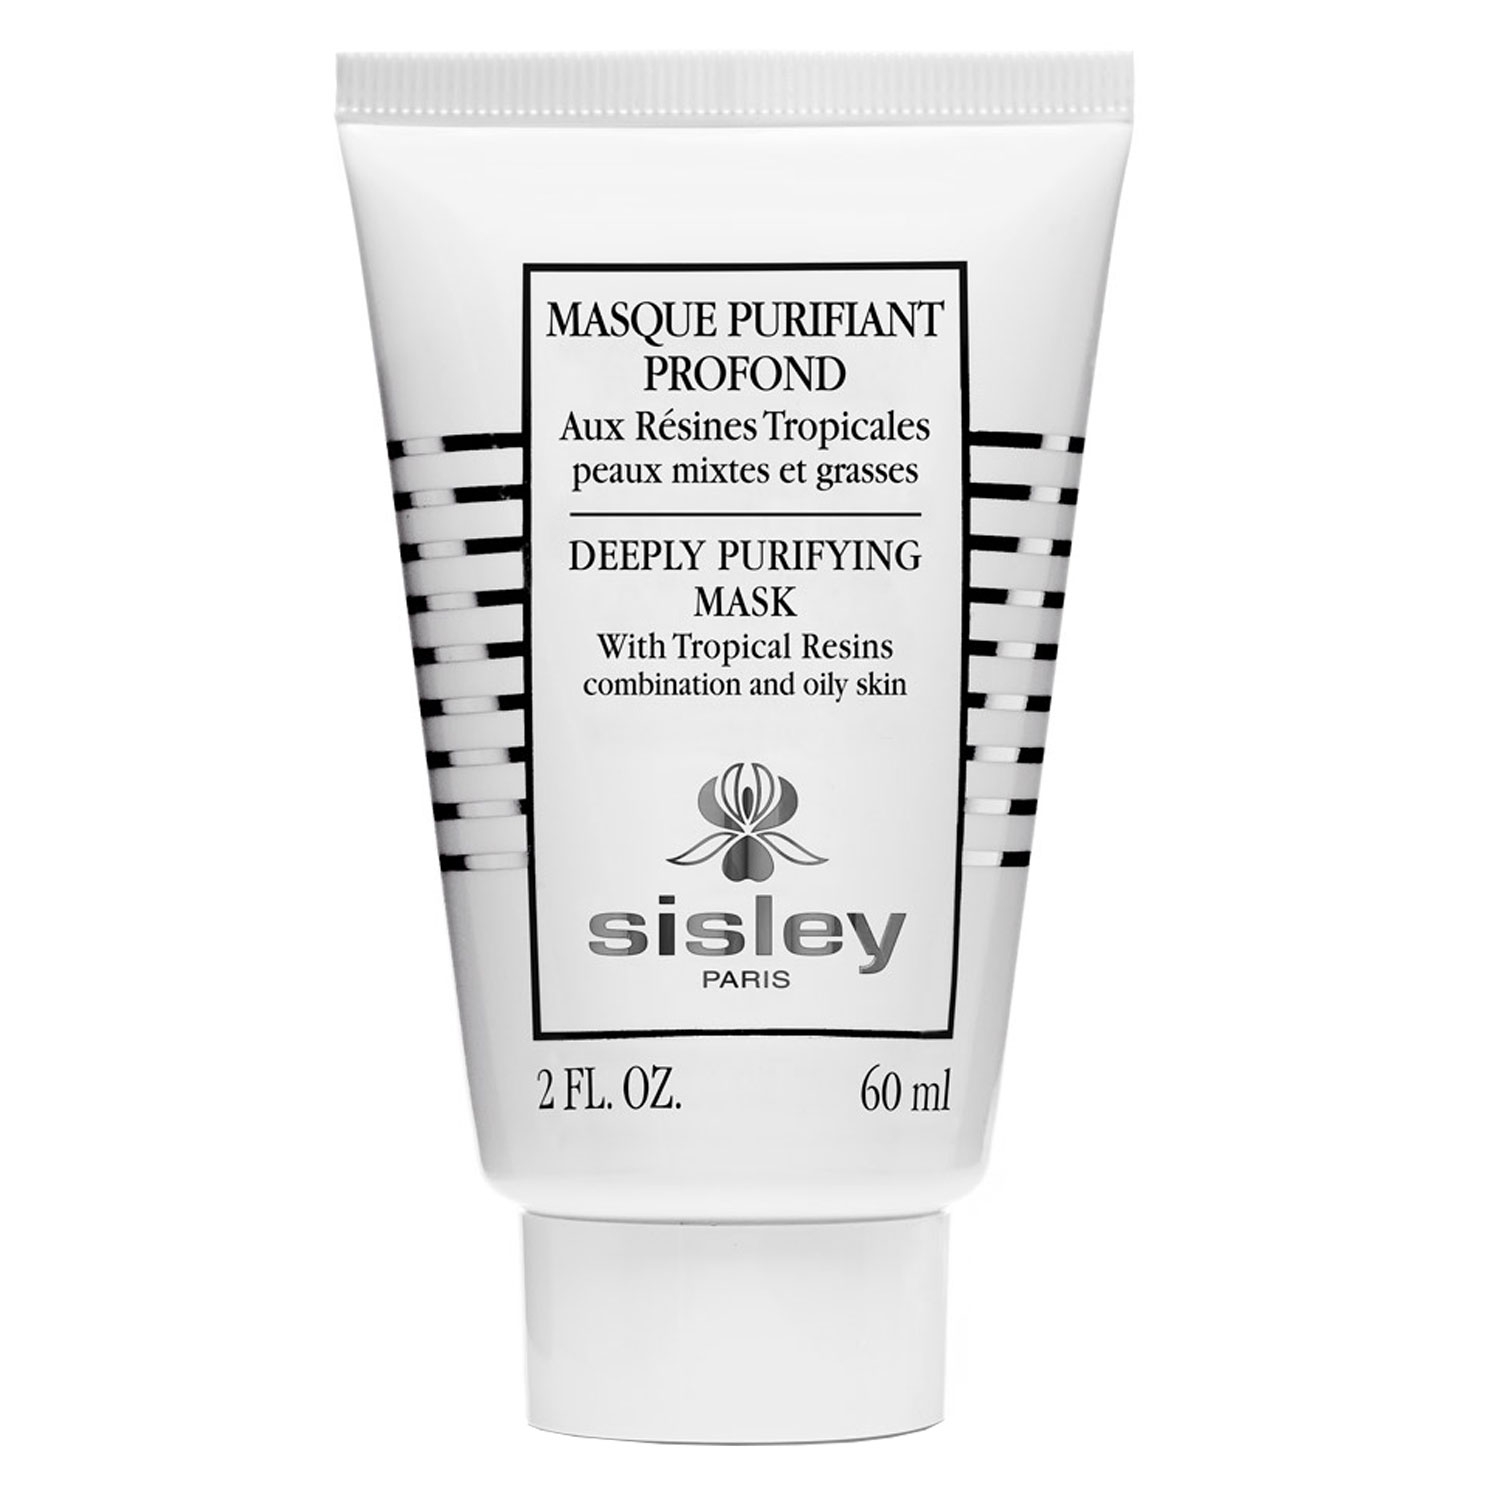 Product image from Sisley Skincare - Masque Purifiant Profond aux Résines Tropicales